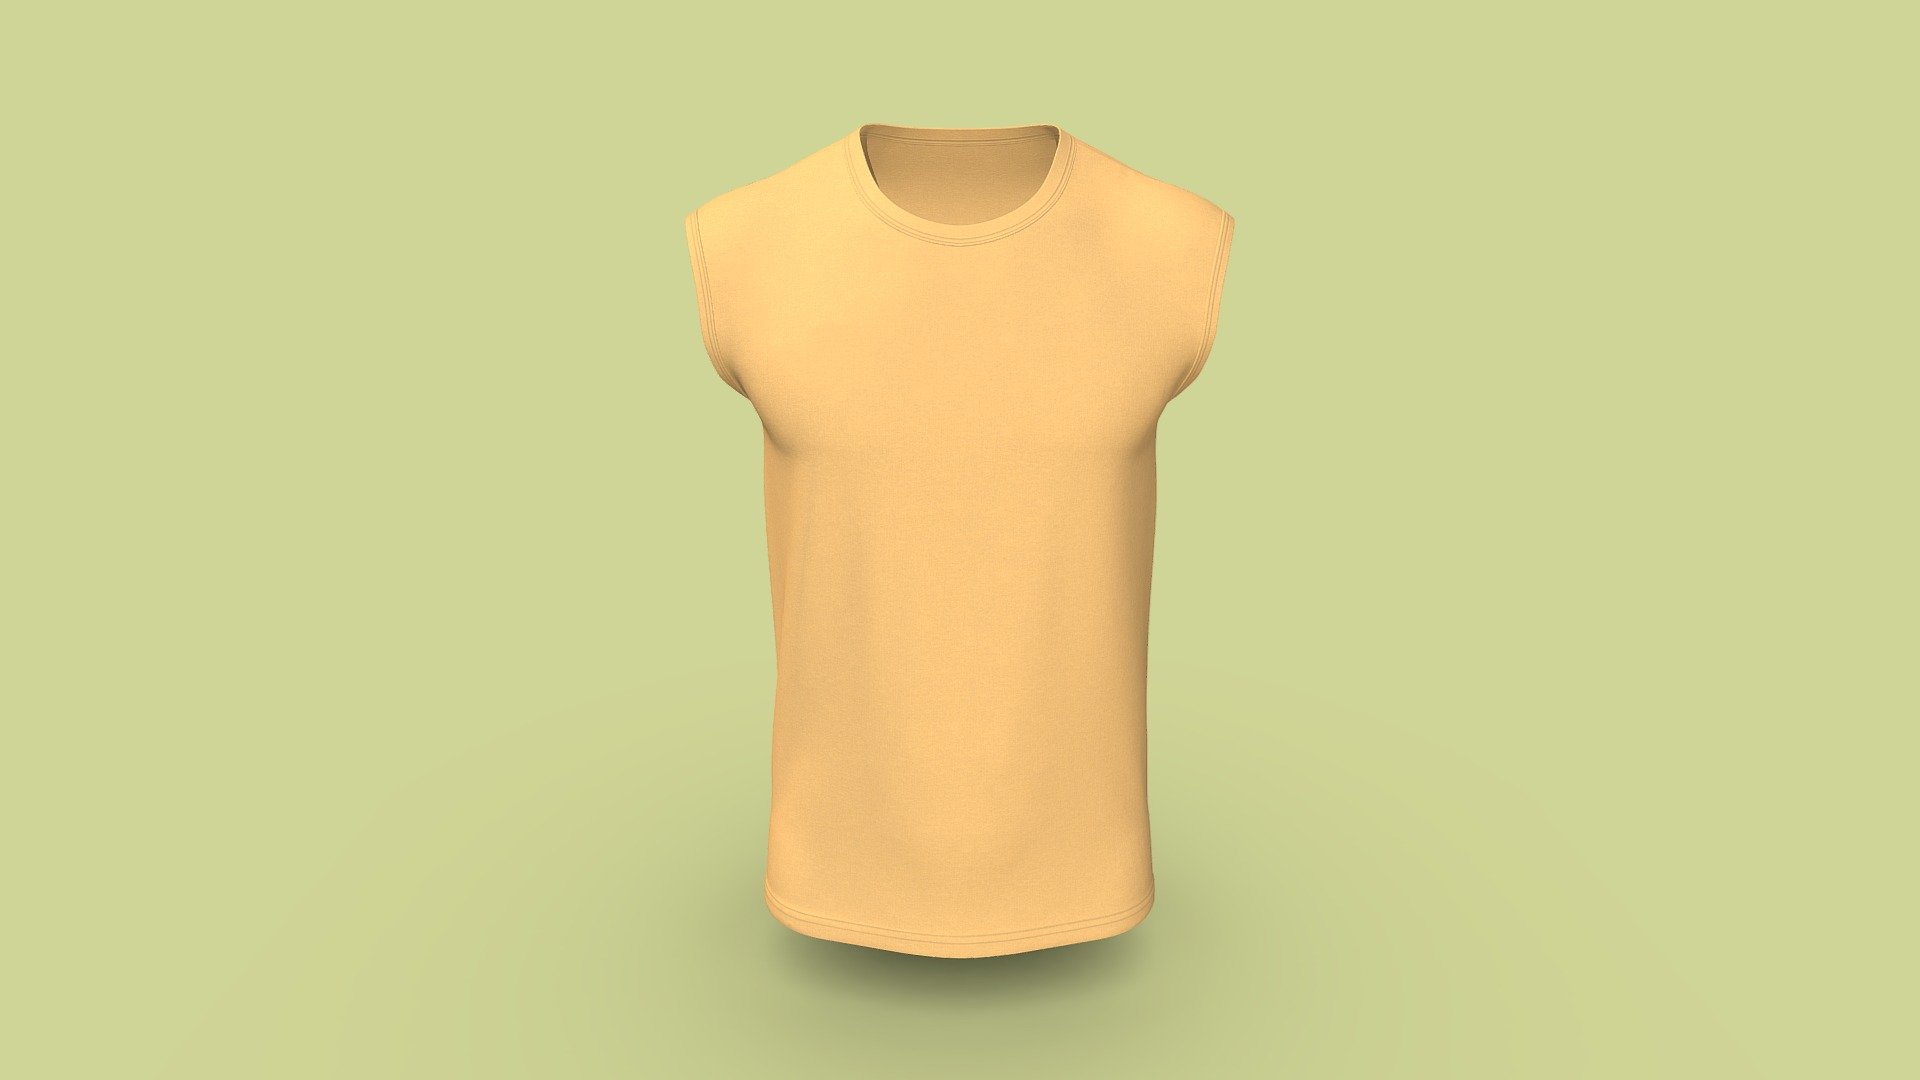 Cloth Title = Sleeveless Casual T-Shirt with Round Neck

SKU = DG100052 

Product Type = Tee 

Cloth Length = Regular 

Body Fit = Regular Fit 

Occasion = Casual  

Sleeve Style = Sleeveless  


Our Services:

3D Apparel Design.

OBJ,FBX,GLTF Making with High/Low Poly.

Fabric Digitalization.

Mockup making.

3D Teck Pack.

Pattern Making.

2D Illustration.

Cloth Animation and 360 Spin Video.


Contact us:- 

Email: info@digitalfashionwear.com 

Website: https://digitalfashionwear.com 

WhatsApp No: +8801759350445 


We designed all the types of cloth specially focused on product visualization, e-commerce, fitting, and production. 

We will design: 

T-shirts 

Polo shirts 

Hoodies 

Sweatshirt 

Jackets 

Shirts 

TankTops 

Trousers 

Bras 

Underwear 

Blazer 

Aprons 

Leggings 

and All Fashion items. 





Our goal is to make sure what we provide you, meets your demand 3d model